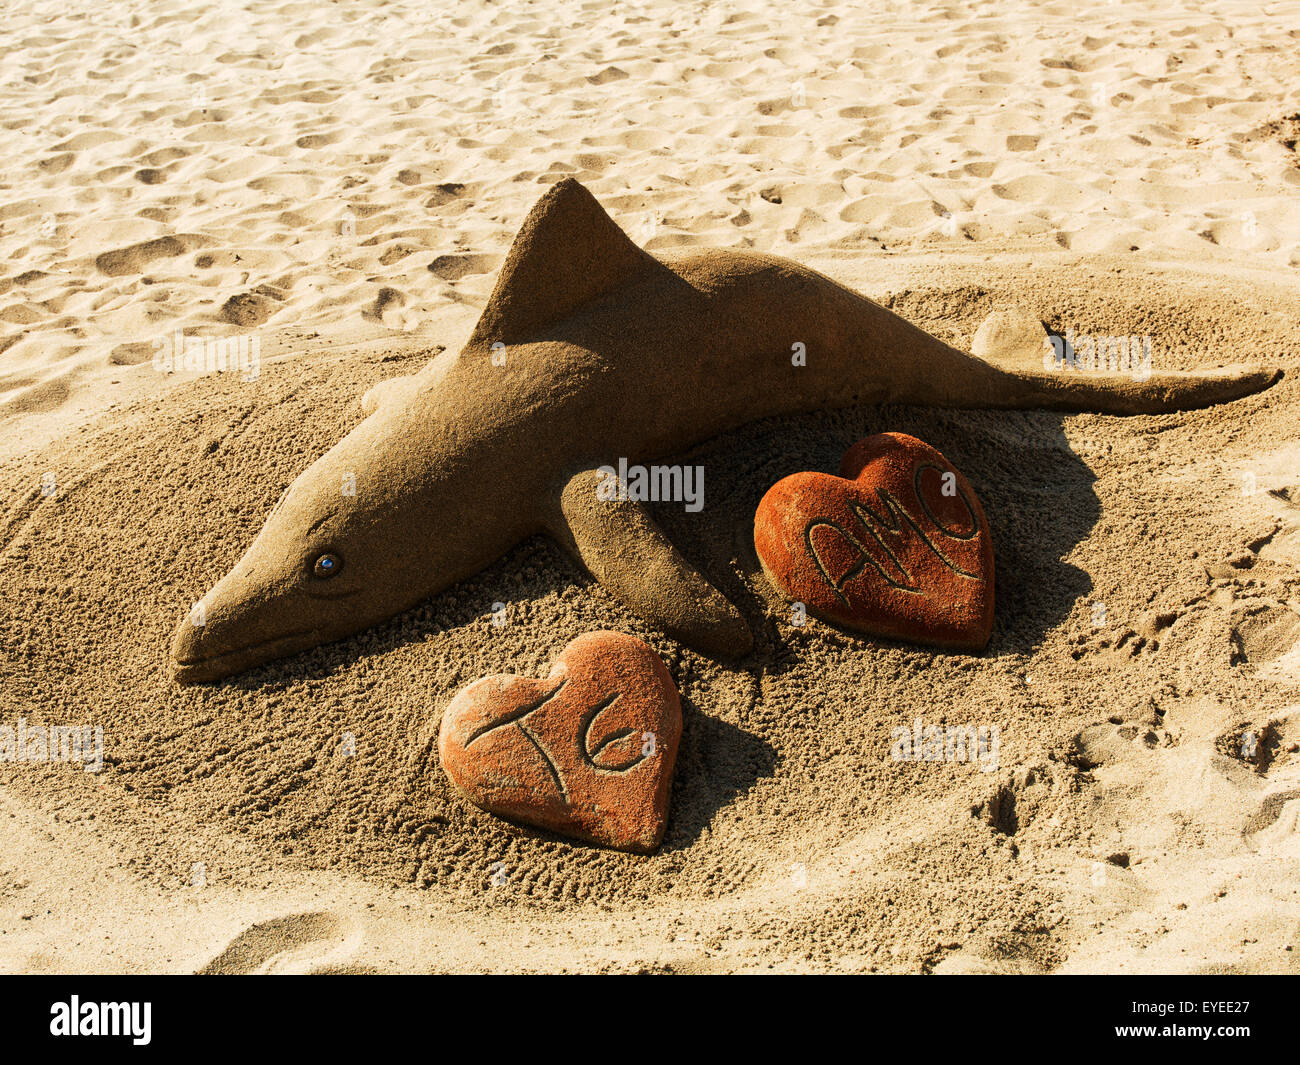 A sand sculpture of a fish with initials in heart shapes; Vina Del Mar, Valparaiso, Chile Stock Photo